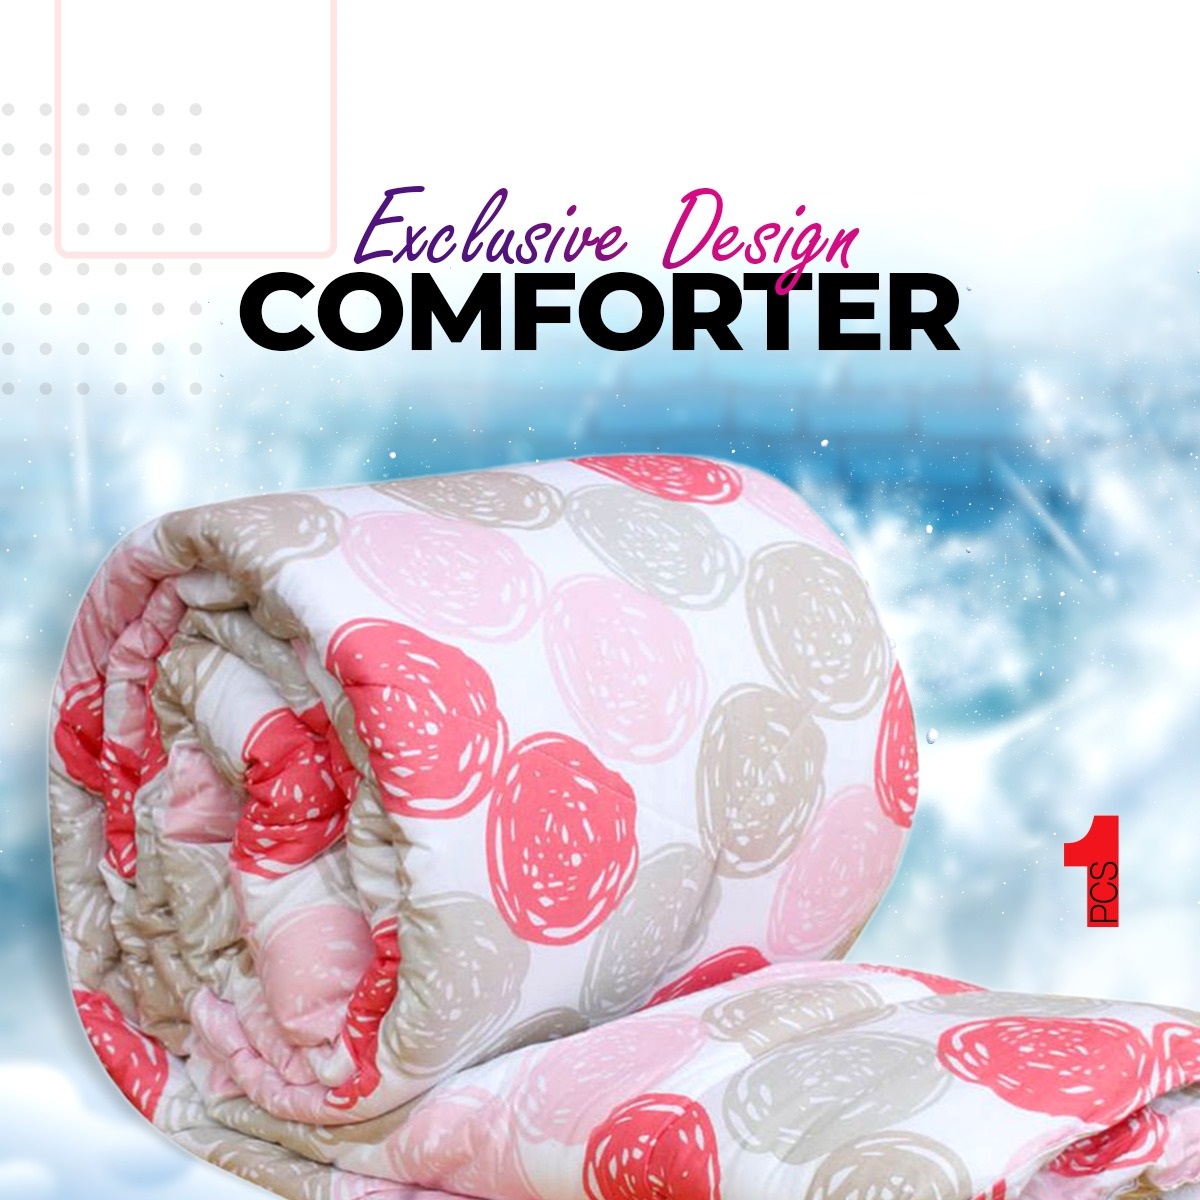 King Size Comforter Cotton Outside Fiber Filler Inside Too Warmth Perfect For Winter - LC009